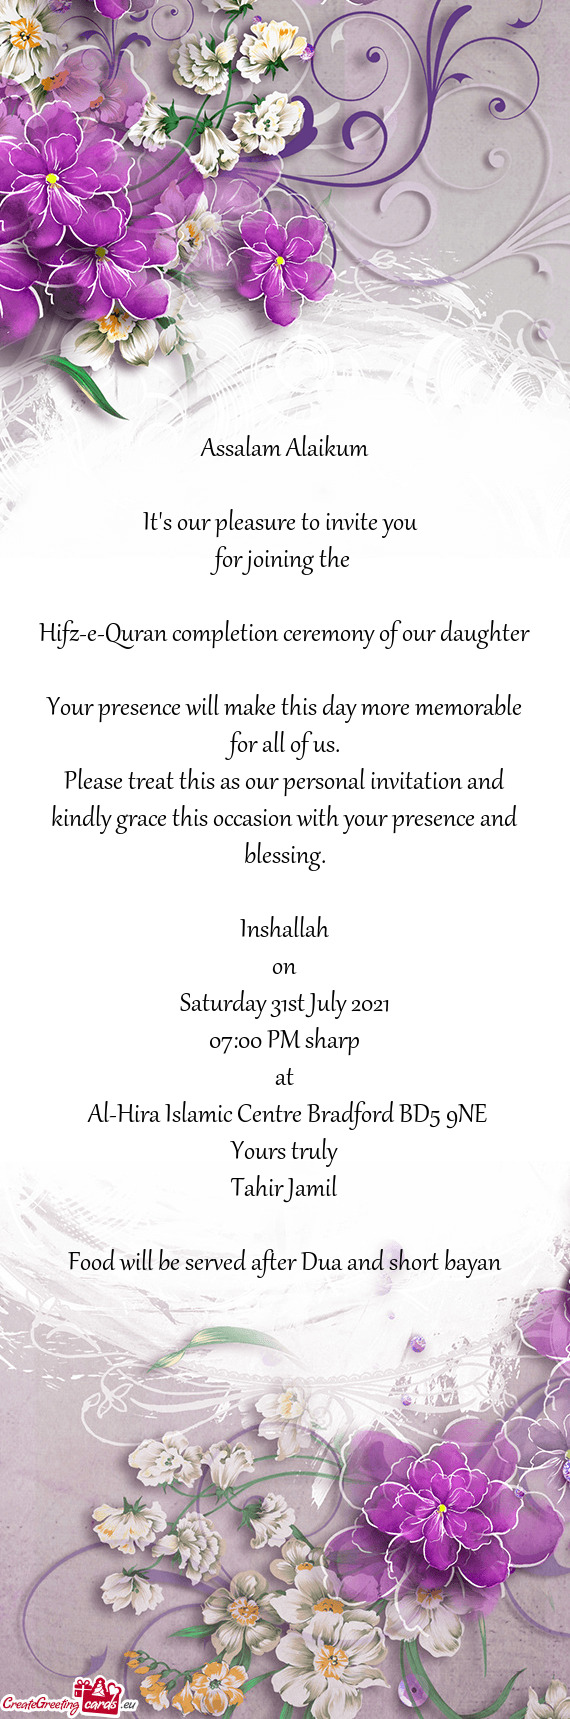 Hifz-e-Quran completion ceremony of our daughter